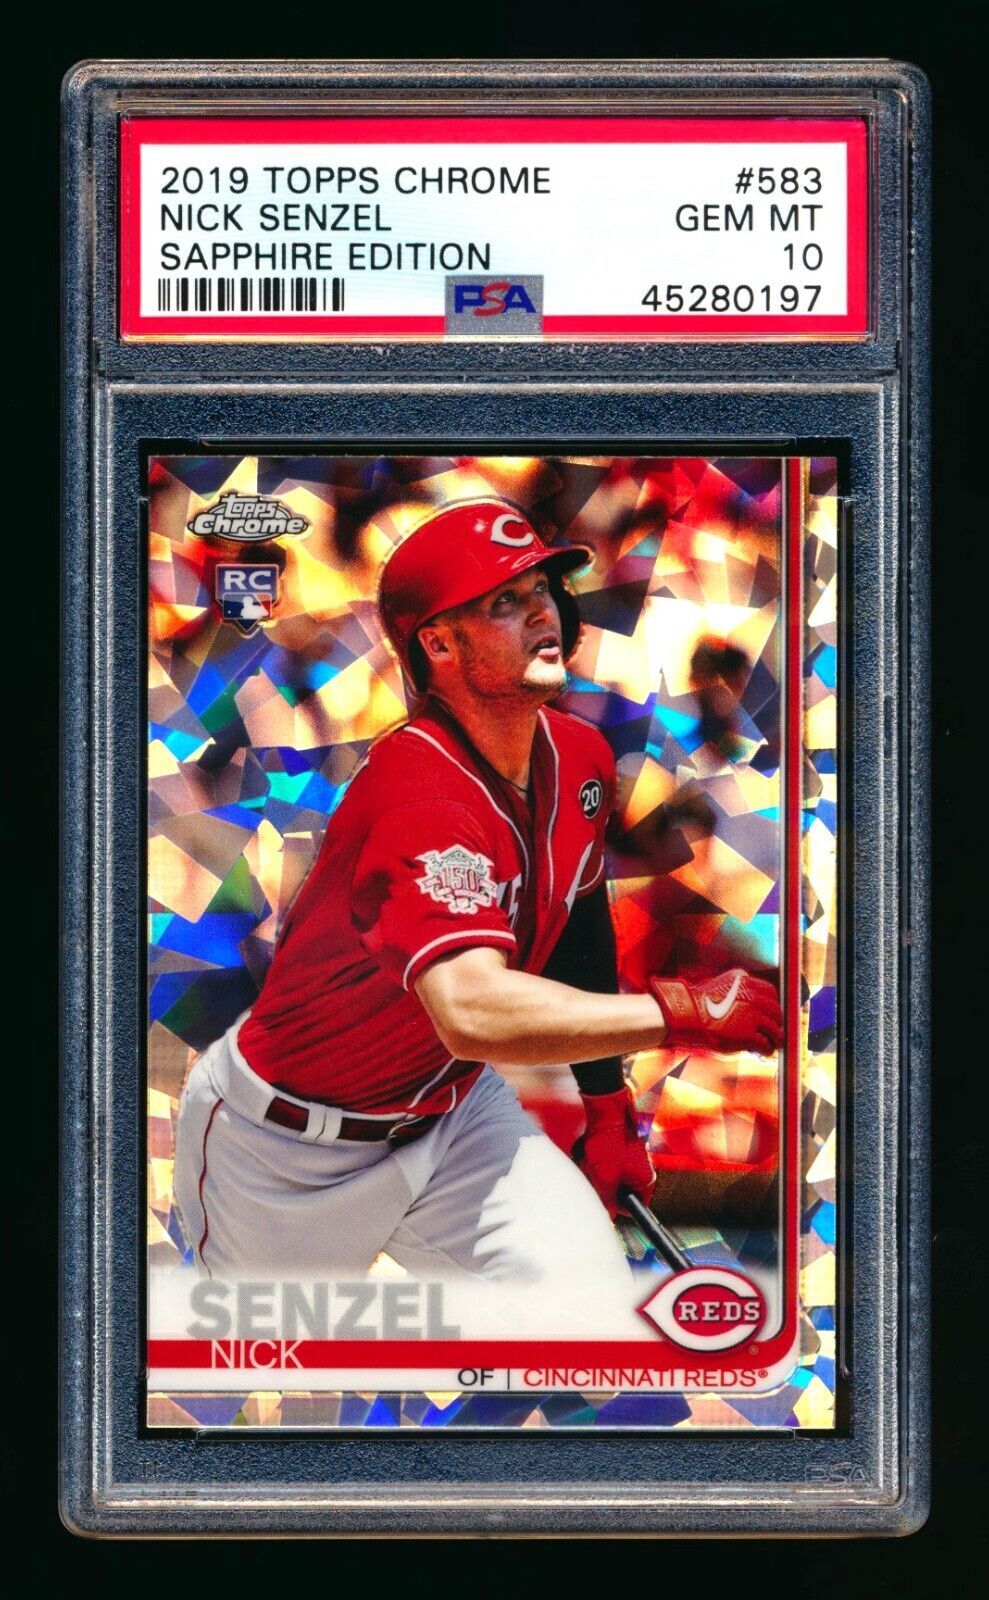 2019 TOPPS CHROME SAPPHIRE #583 NICK SENZEL RC ICE REFRACTOR REDS ROOKIE PSA 10!